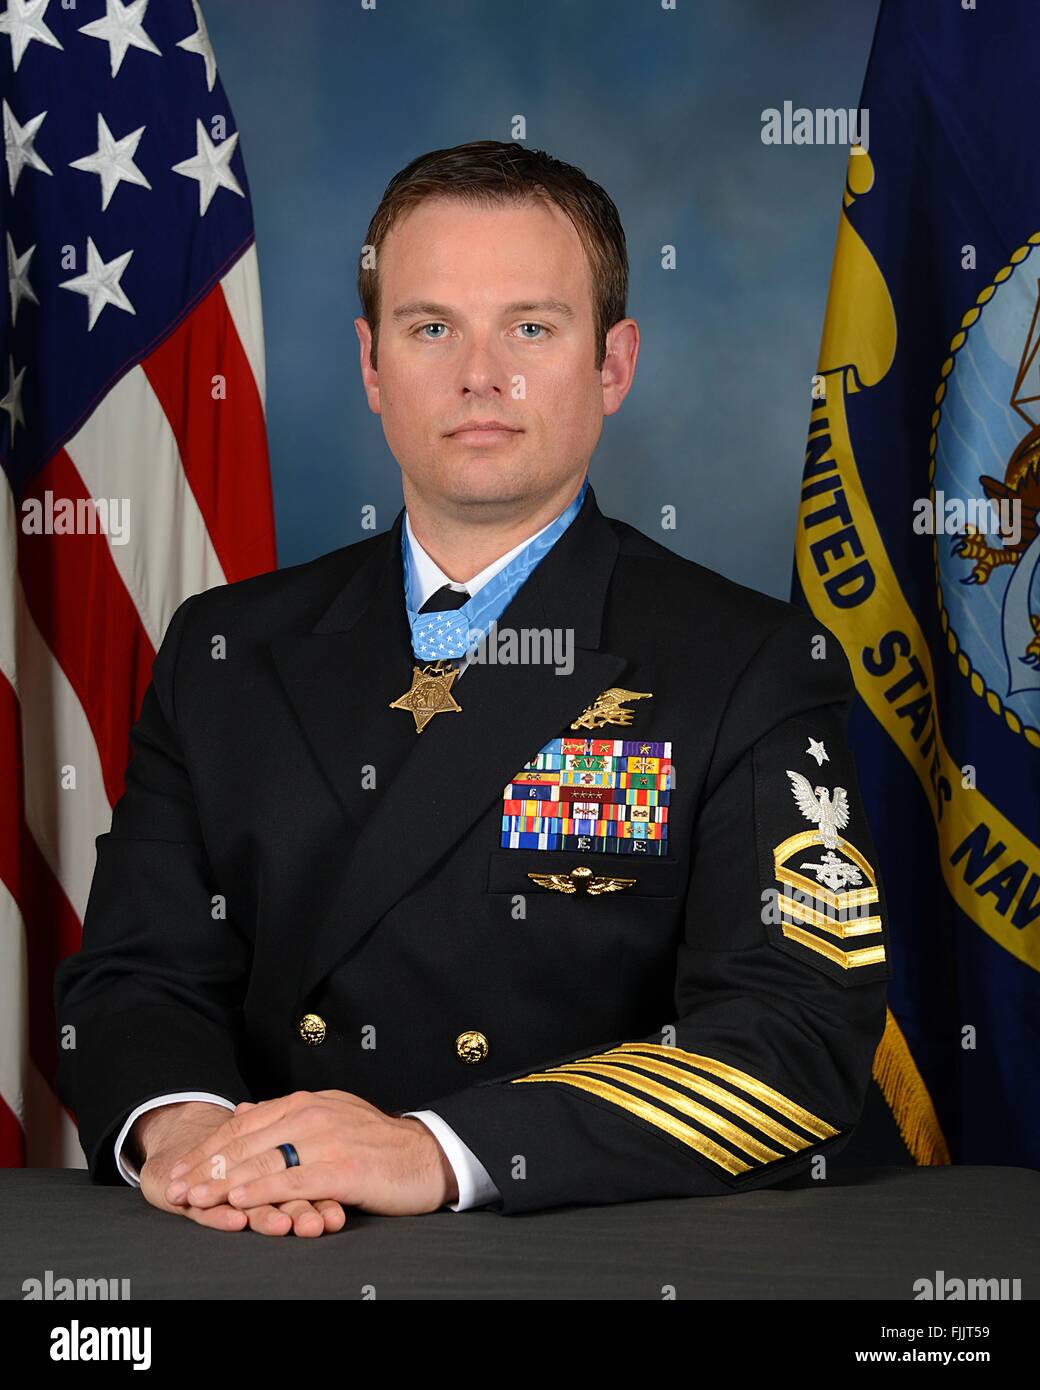 U.S. Navy SEAL Senior Chief Special Warfare Operator Edward Byers official portrait in dress uniform with the Medal of Honor at the Pentagon March 1, 2016 in Washington, DC. Byers, a member of SEAL Team Six was awarded the medal for his role in rescuing an American civilian being held hostage by Taliban insurgents in Afghanistan during a White House ceremony February 29, 2016. Stock Photo